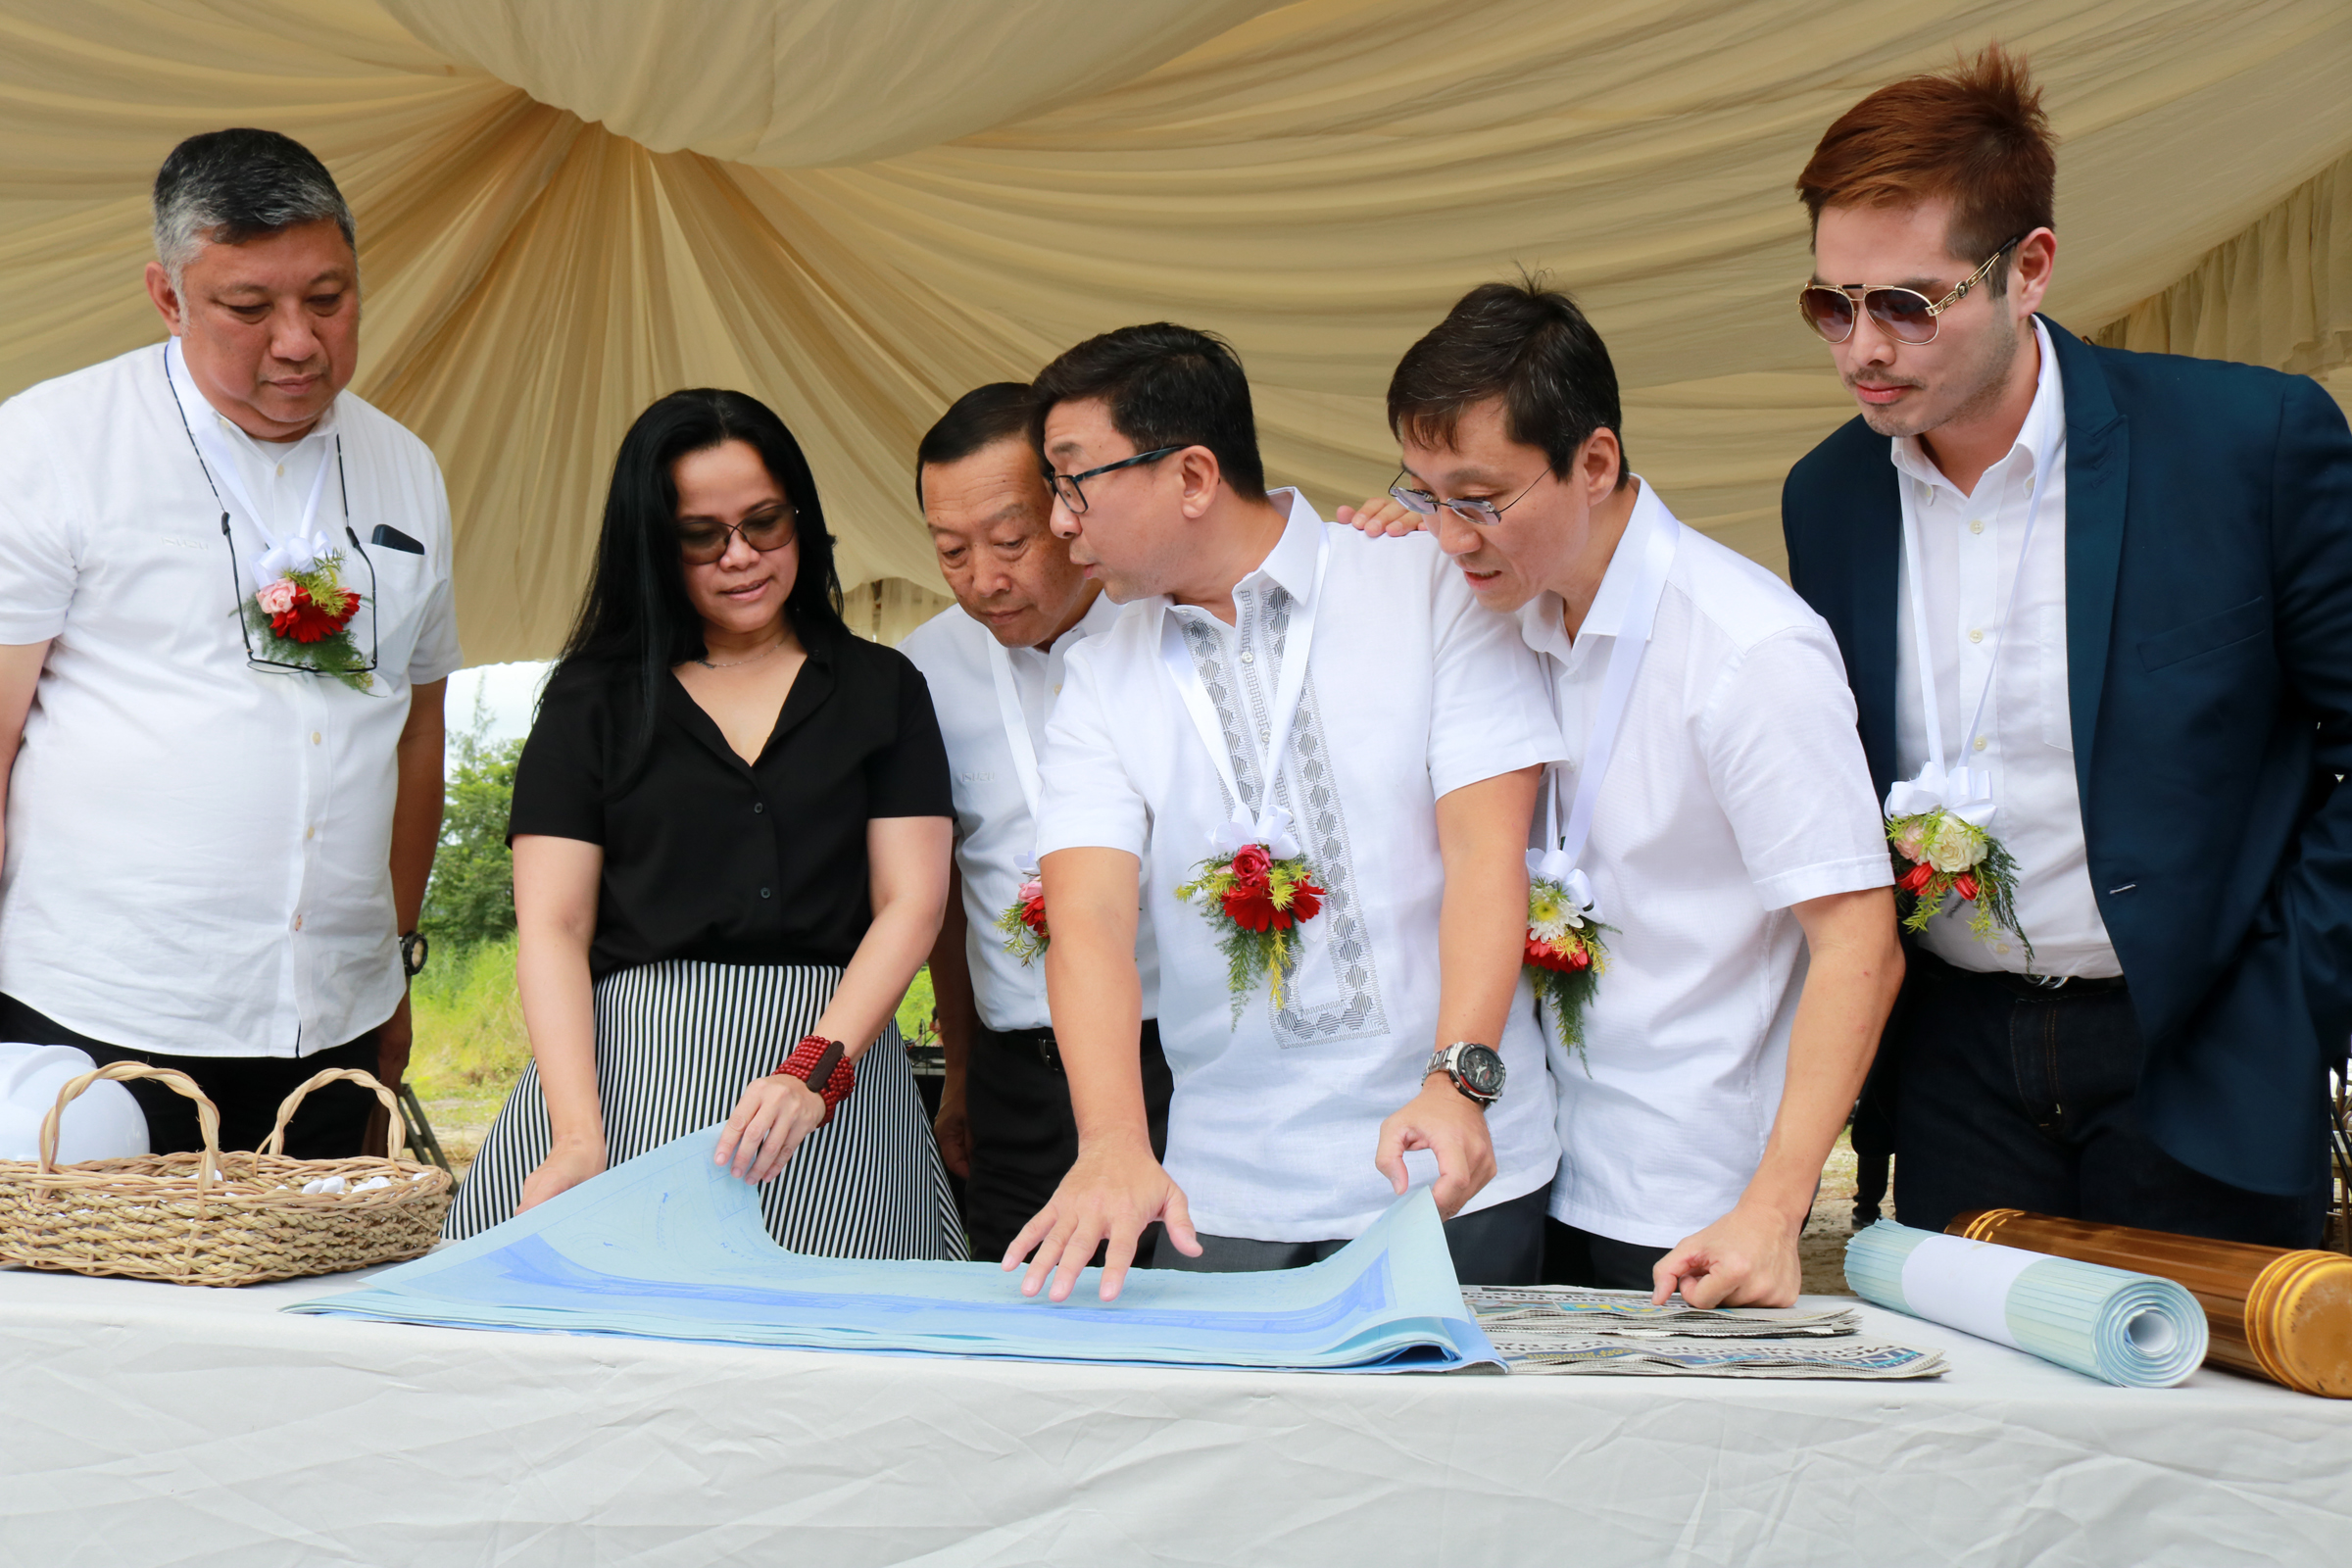 SBMA Chairman and Administrator Wilma T. Eisma views a blueprint for the proposed Isuzu Subic showroom during the project ground-breaking ceremony on Friday at the Subic Bay Gateway Park in the Subic Bay Freeport. Â Joining her are (left to right): Isuzu Phils. Sales Head Joseph Bautista, Isuzu Phils. President Hajime Koso, Velocity Motors President Jason Hao, Velocity Motors Director Jeffrey Hao Lin, and SBMA Senior Deputy Administrator for Business and Investment Renato Lee.